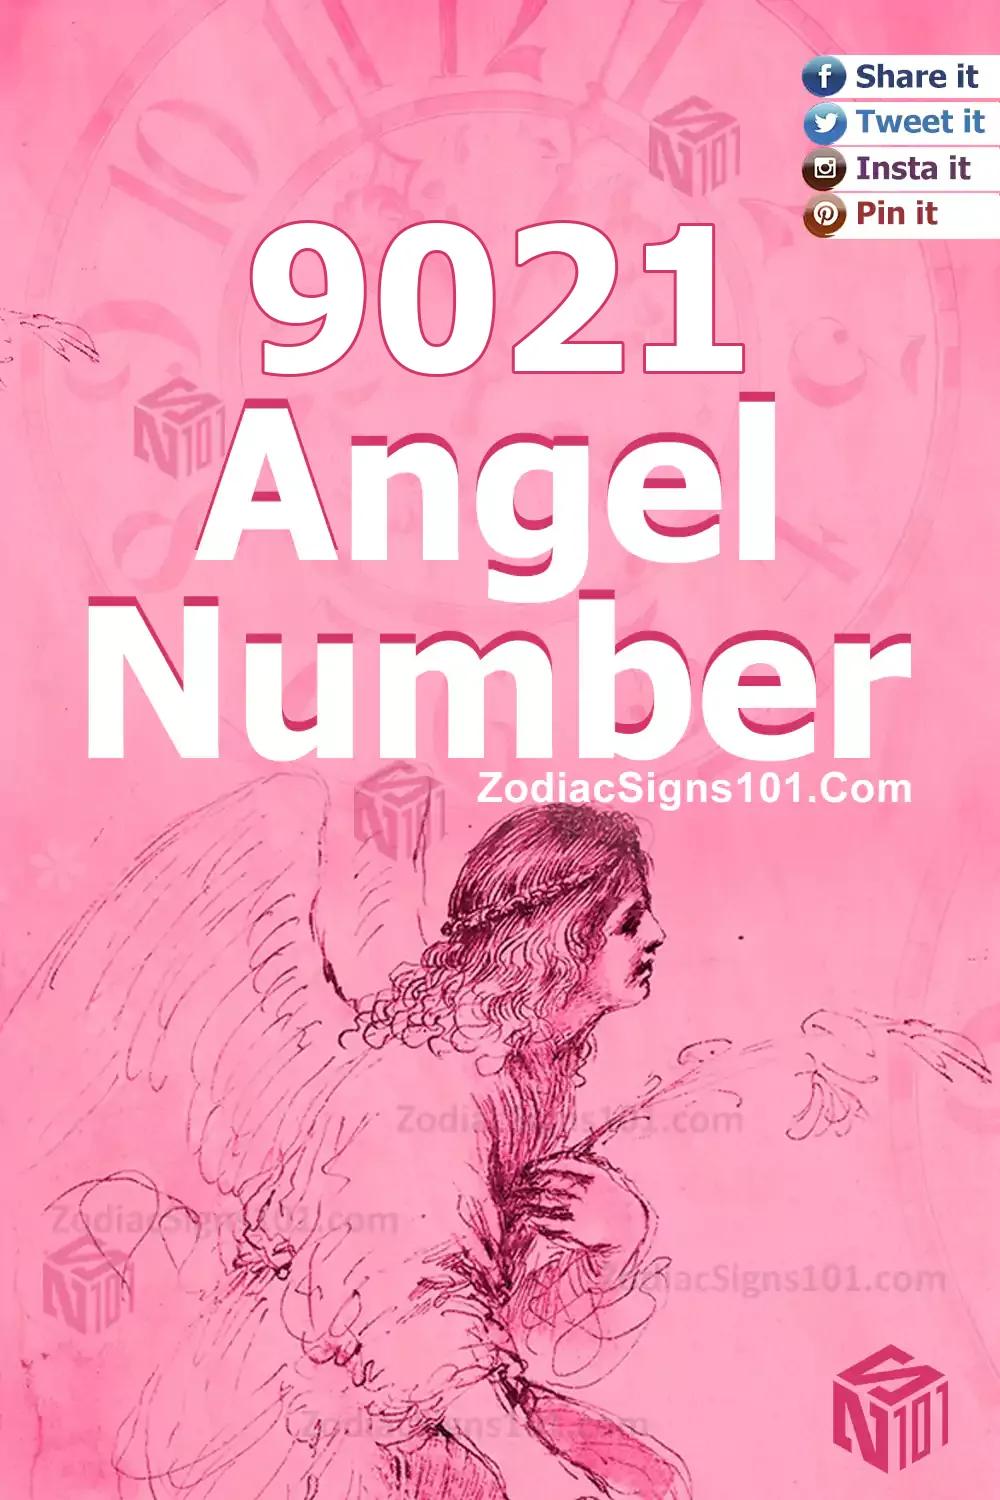 9021 Angel Number Meaning